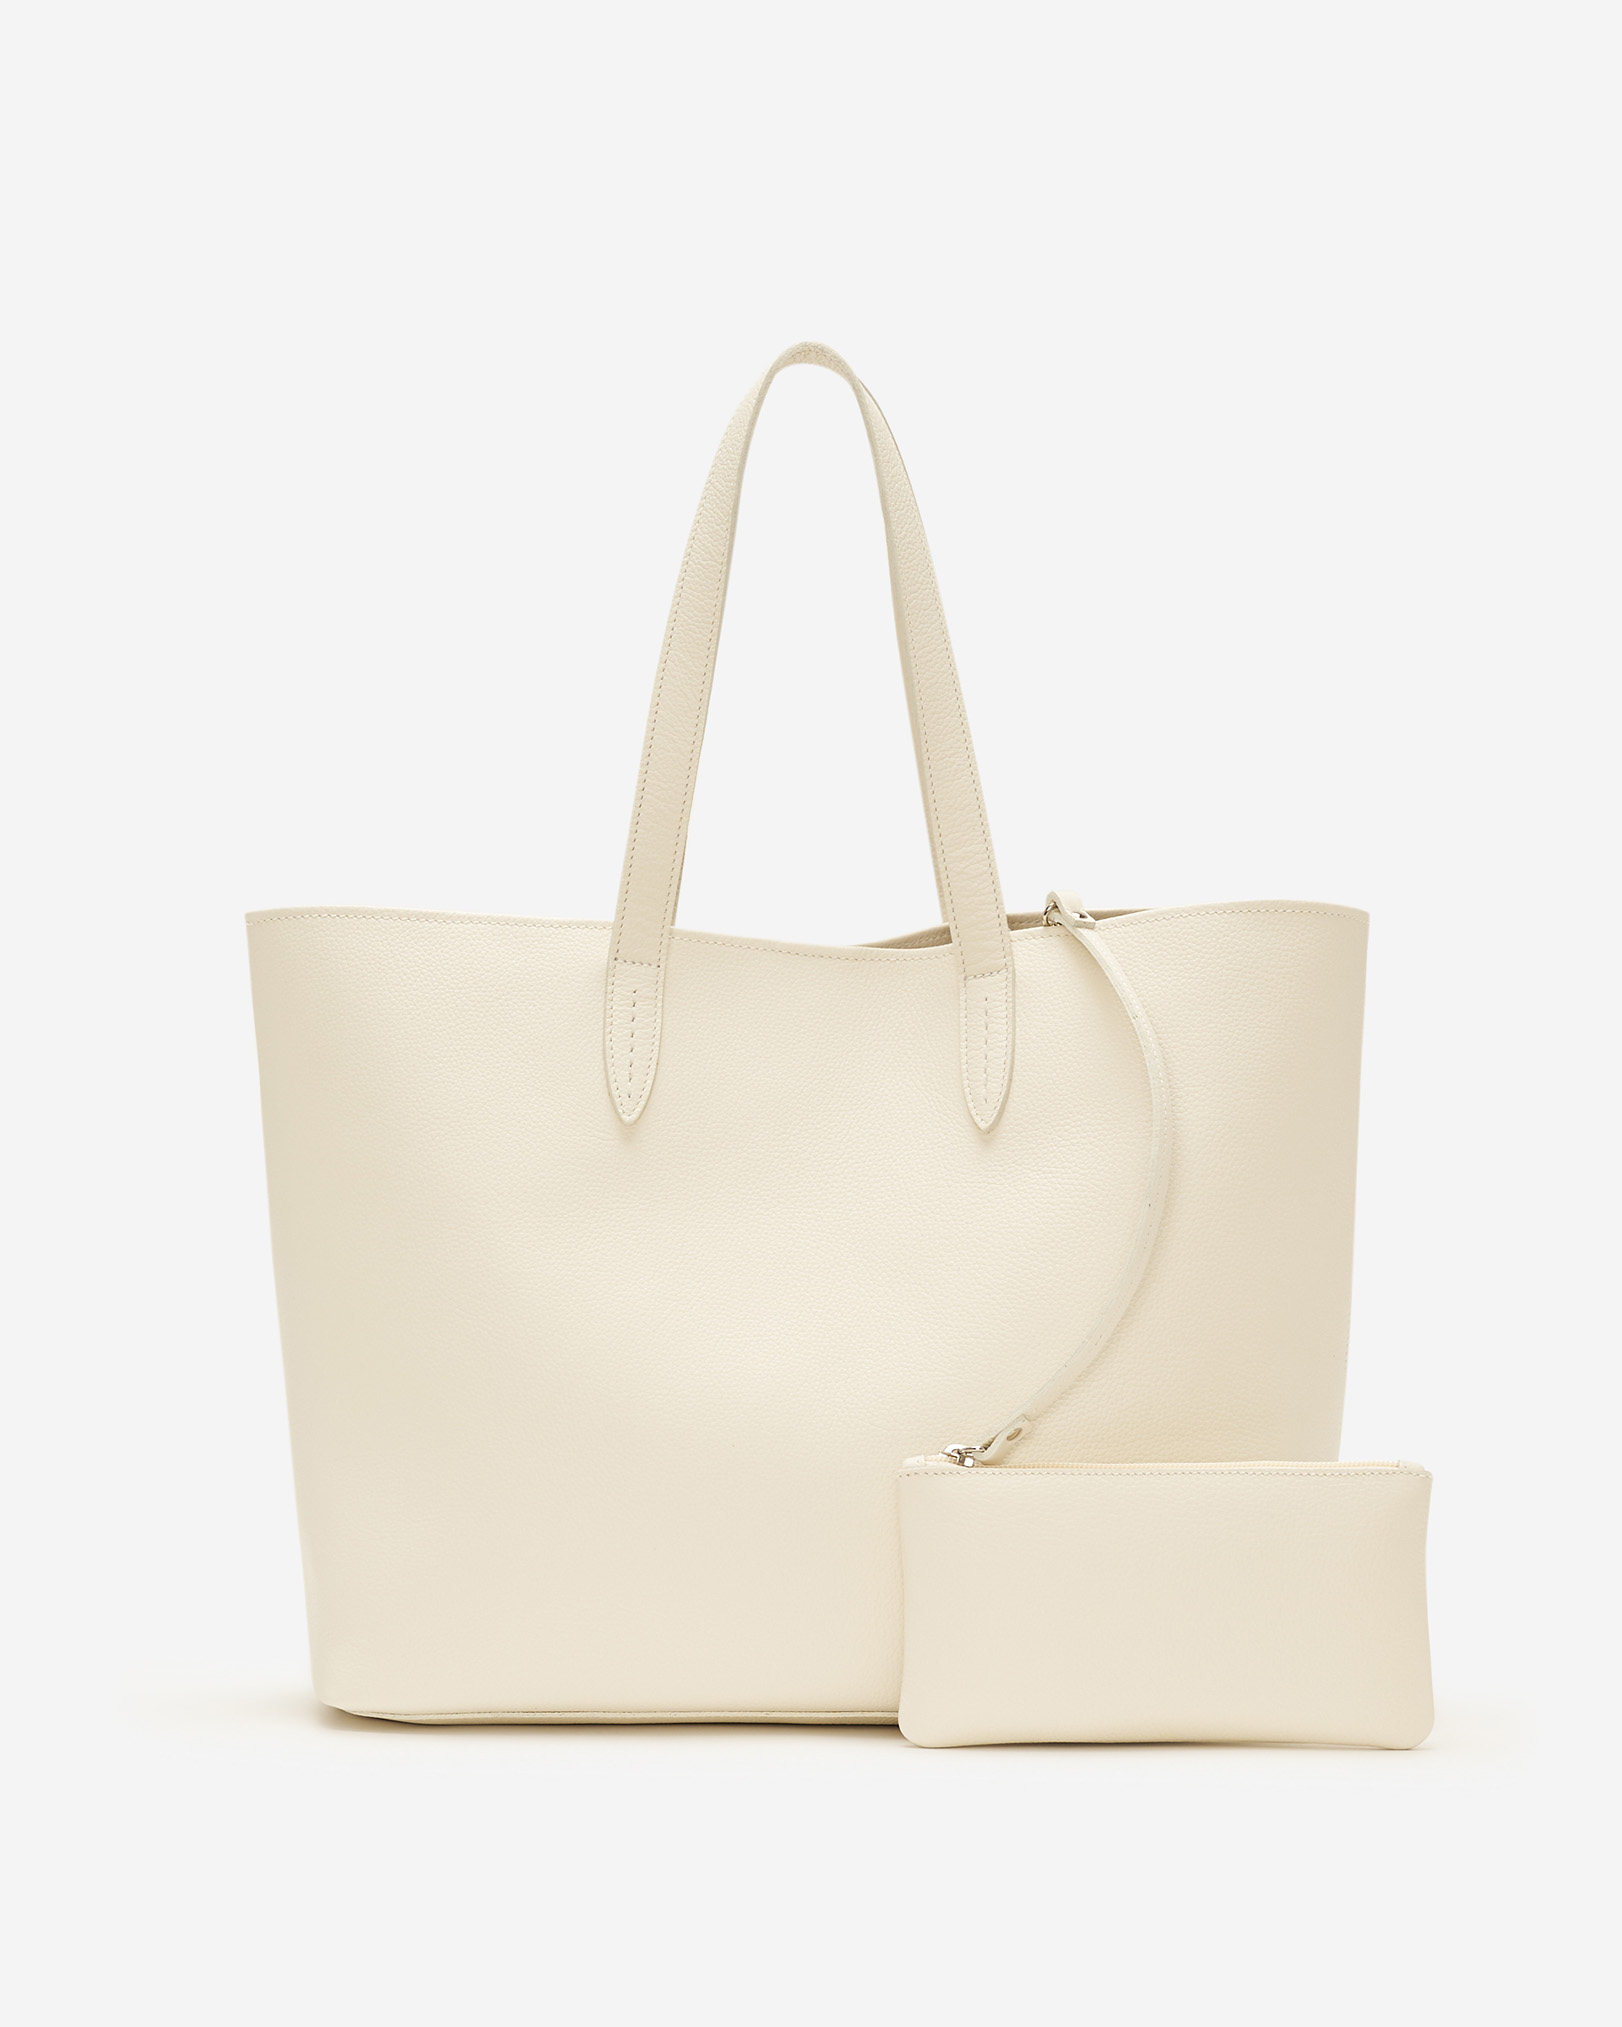 Roots Carryall Tote Cervino in Ivory/Camel